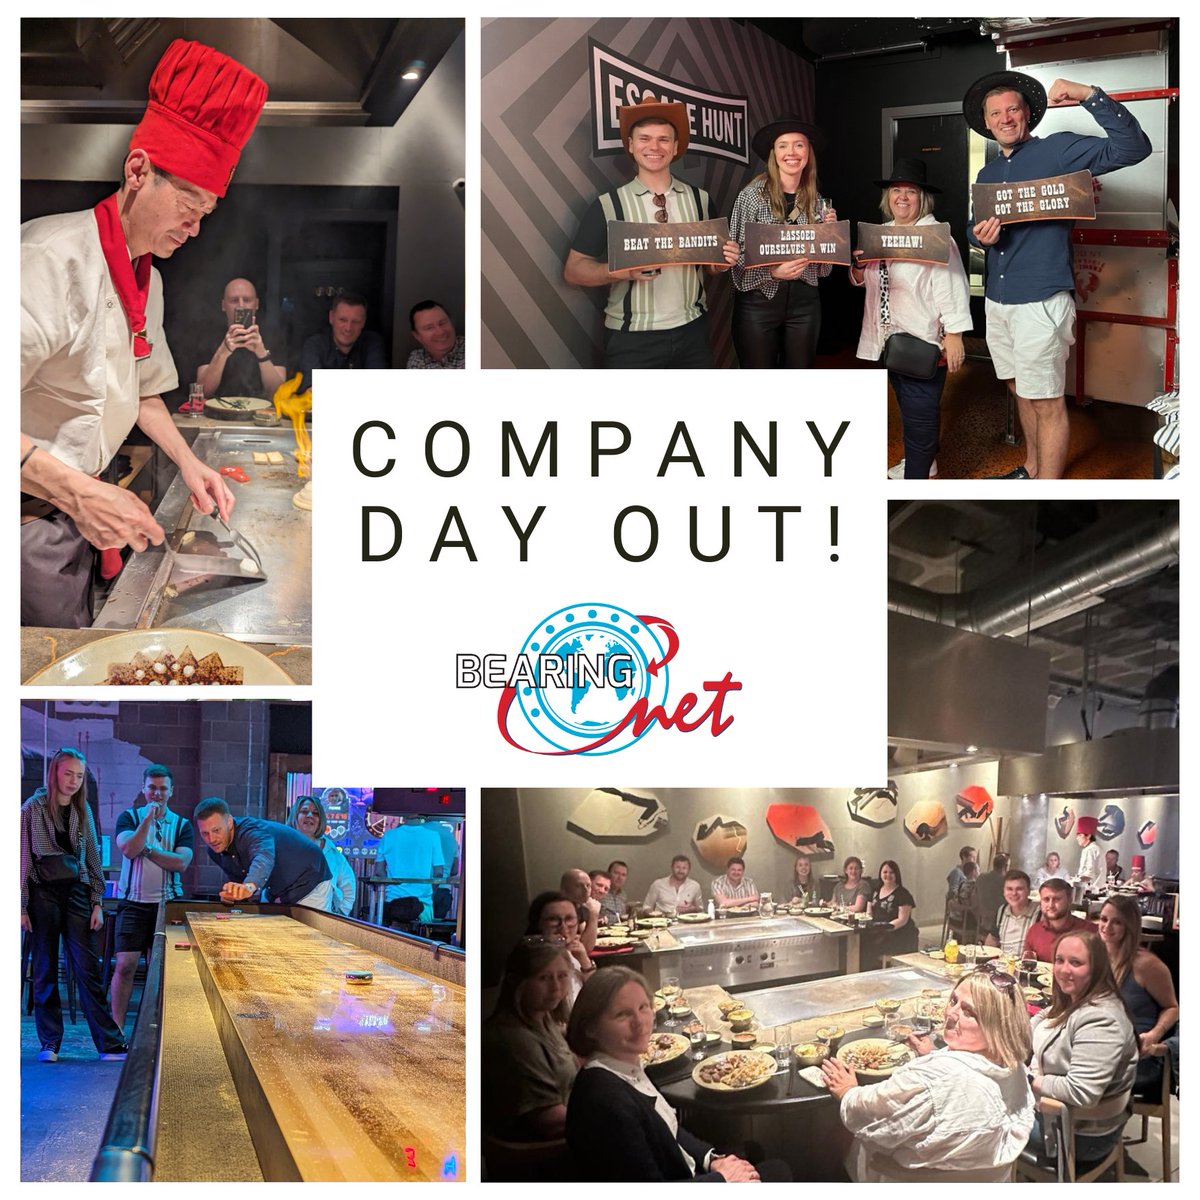 BearingNet company day out! The BearingNet team spent some quality time together at the weekend after another successful year of platform growth, with over 2,000 distributors now trading globally. #companydayout #teambuilding #bearingnet